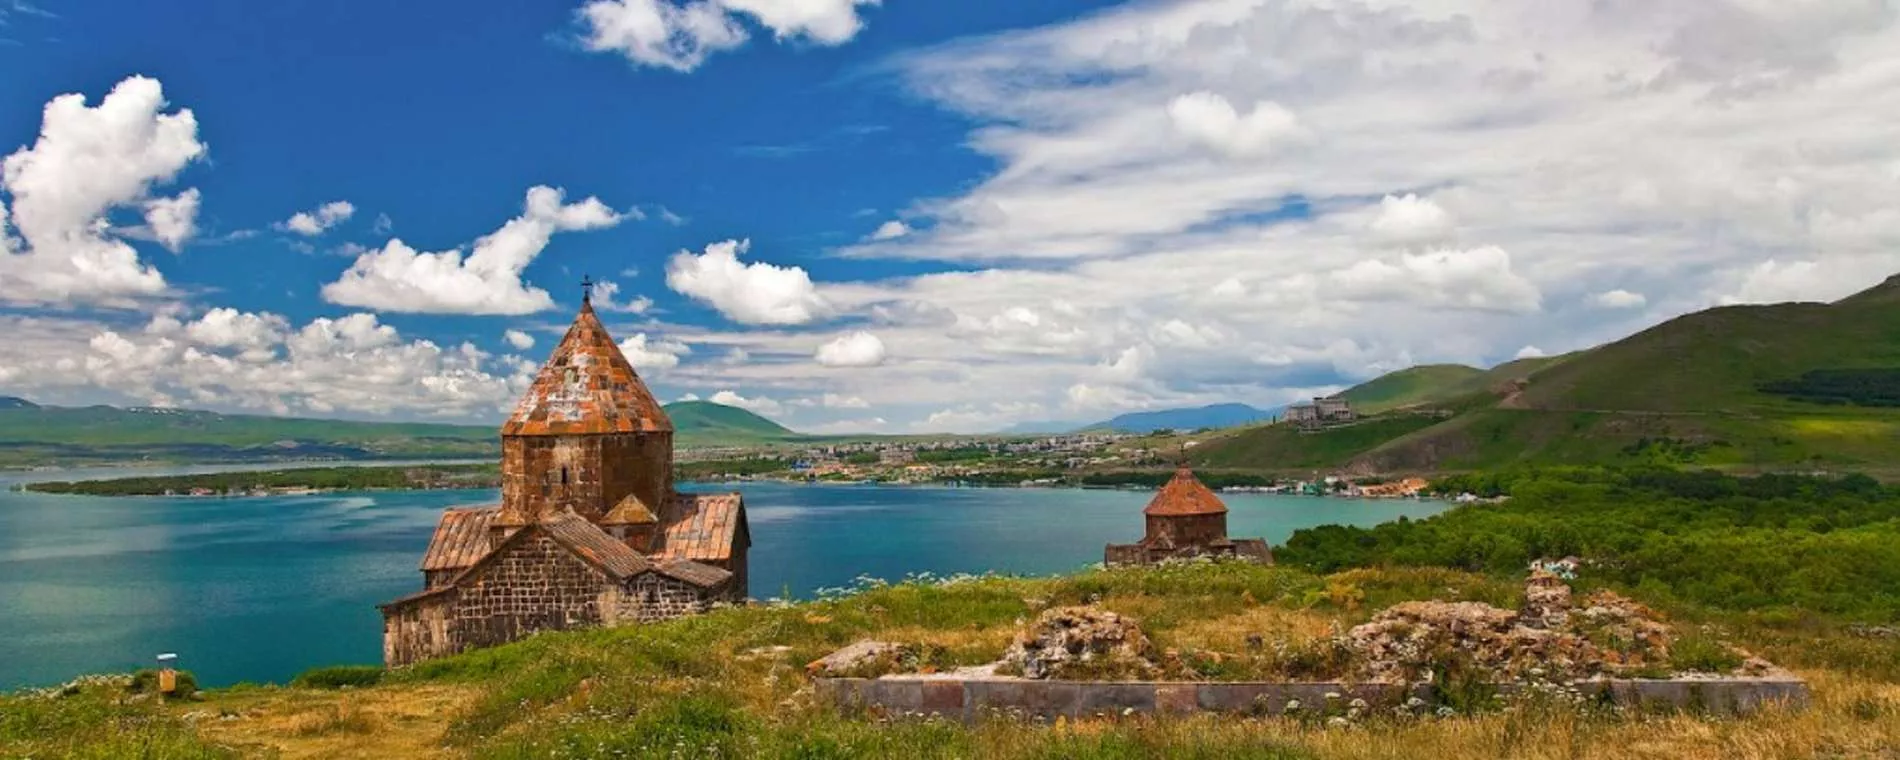 Sevanavank Monastery in Armenia, Middle East | Architecture - Rated 3.9